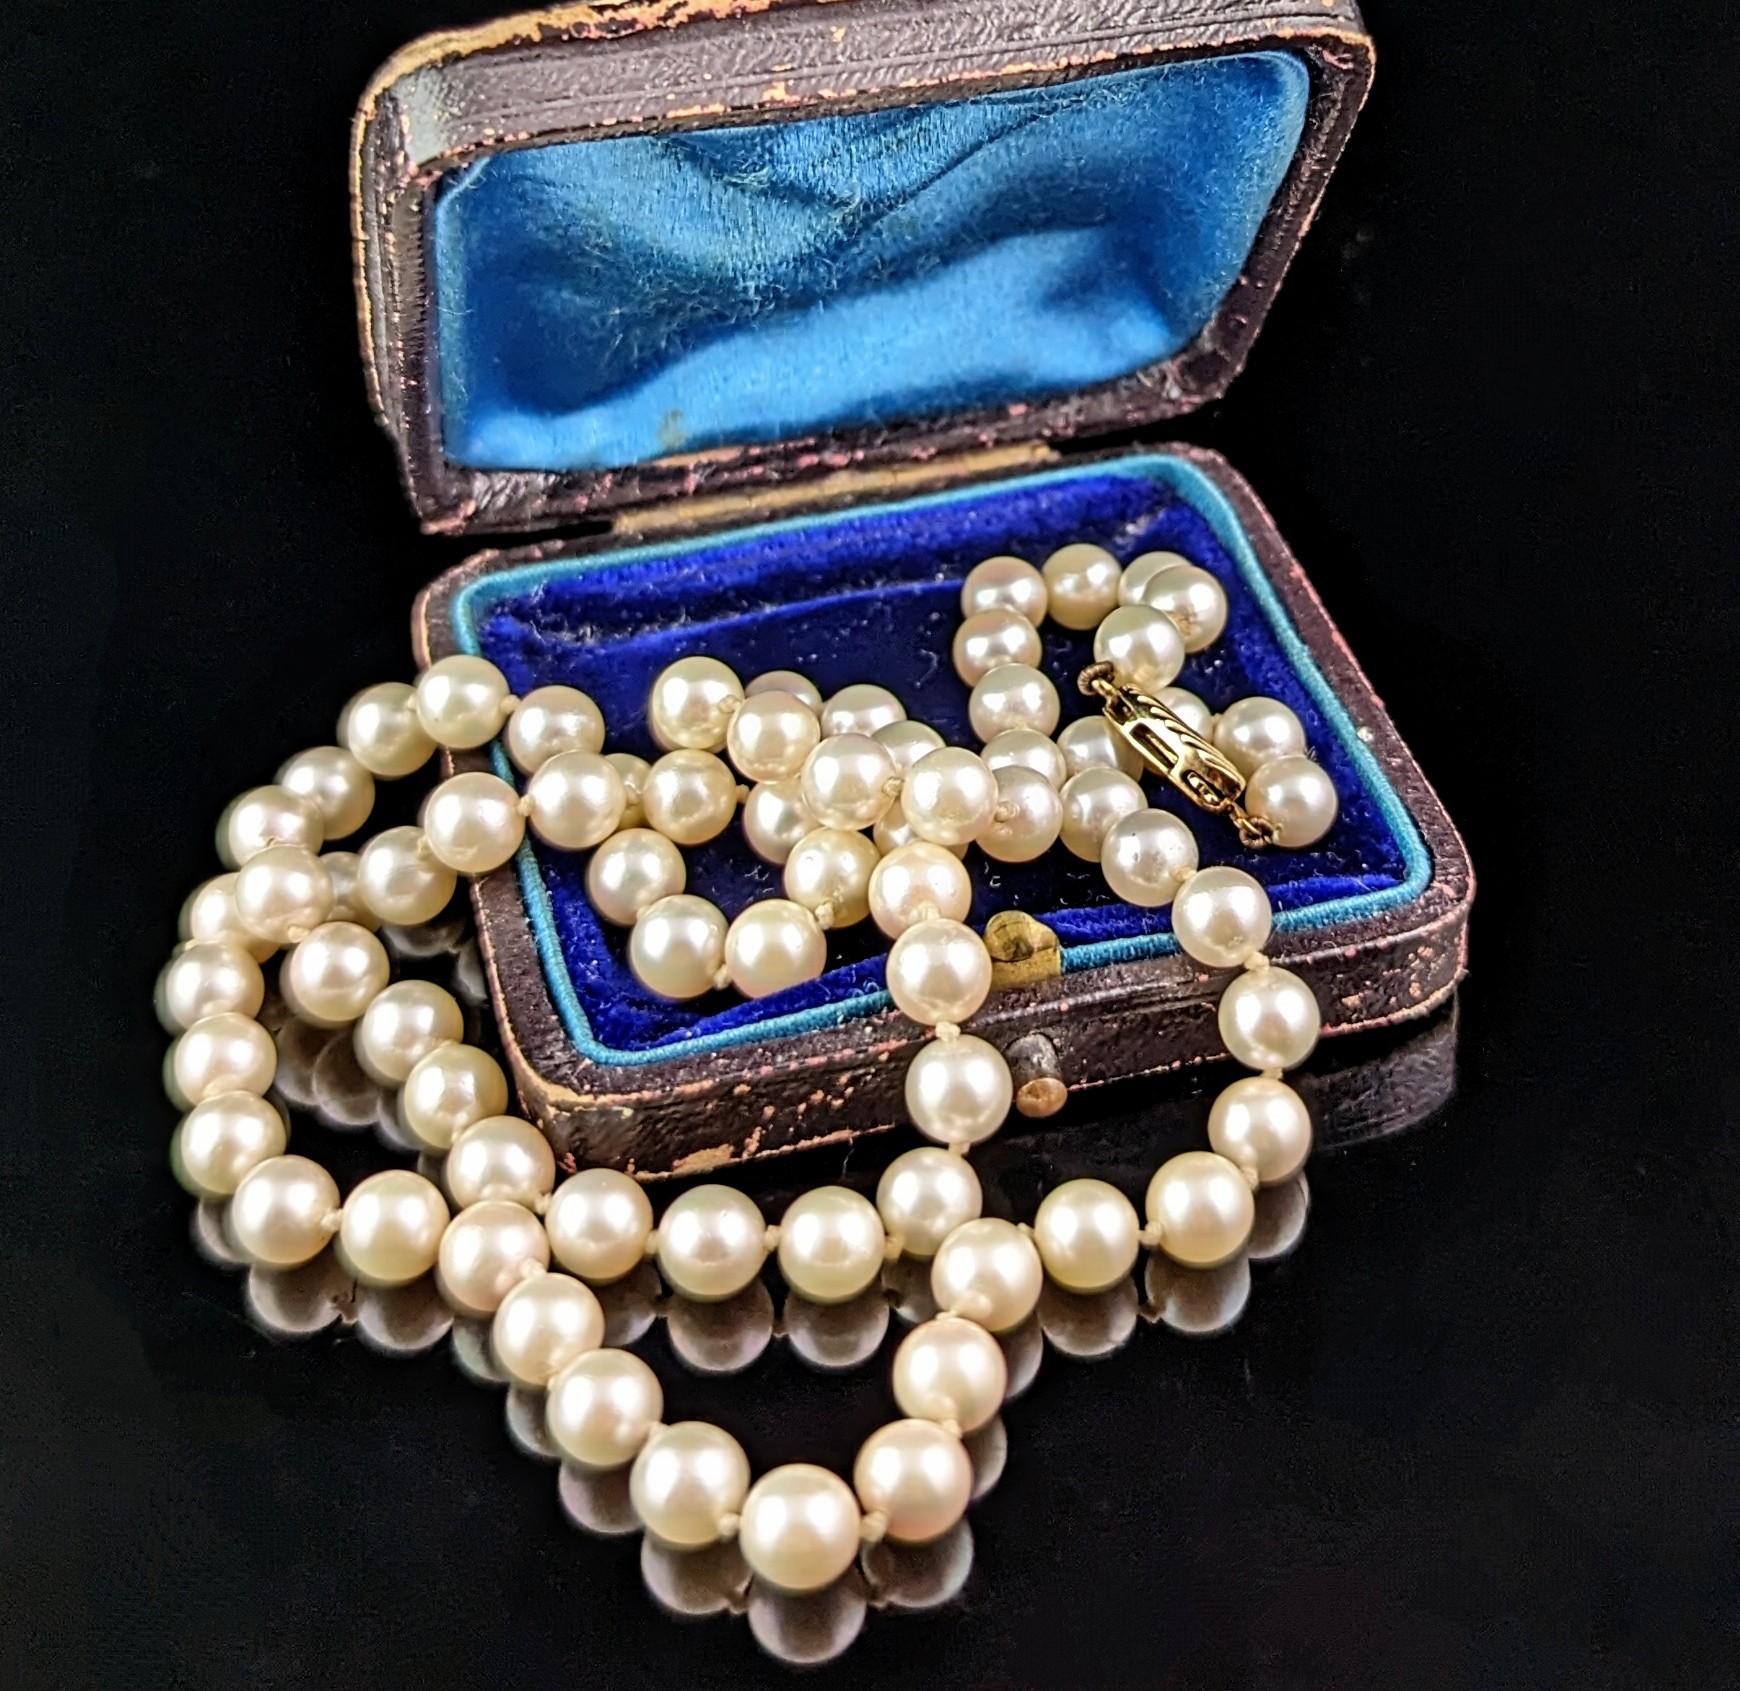 A stunning vintage mid century cultured pearl, single strand necklace.

Lustrous cultured pearls with such lovely Rosey and blue overtones when hitting the light, a sumptuous and elegant piece, the classic pearl necklace is a timeless jewellery